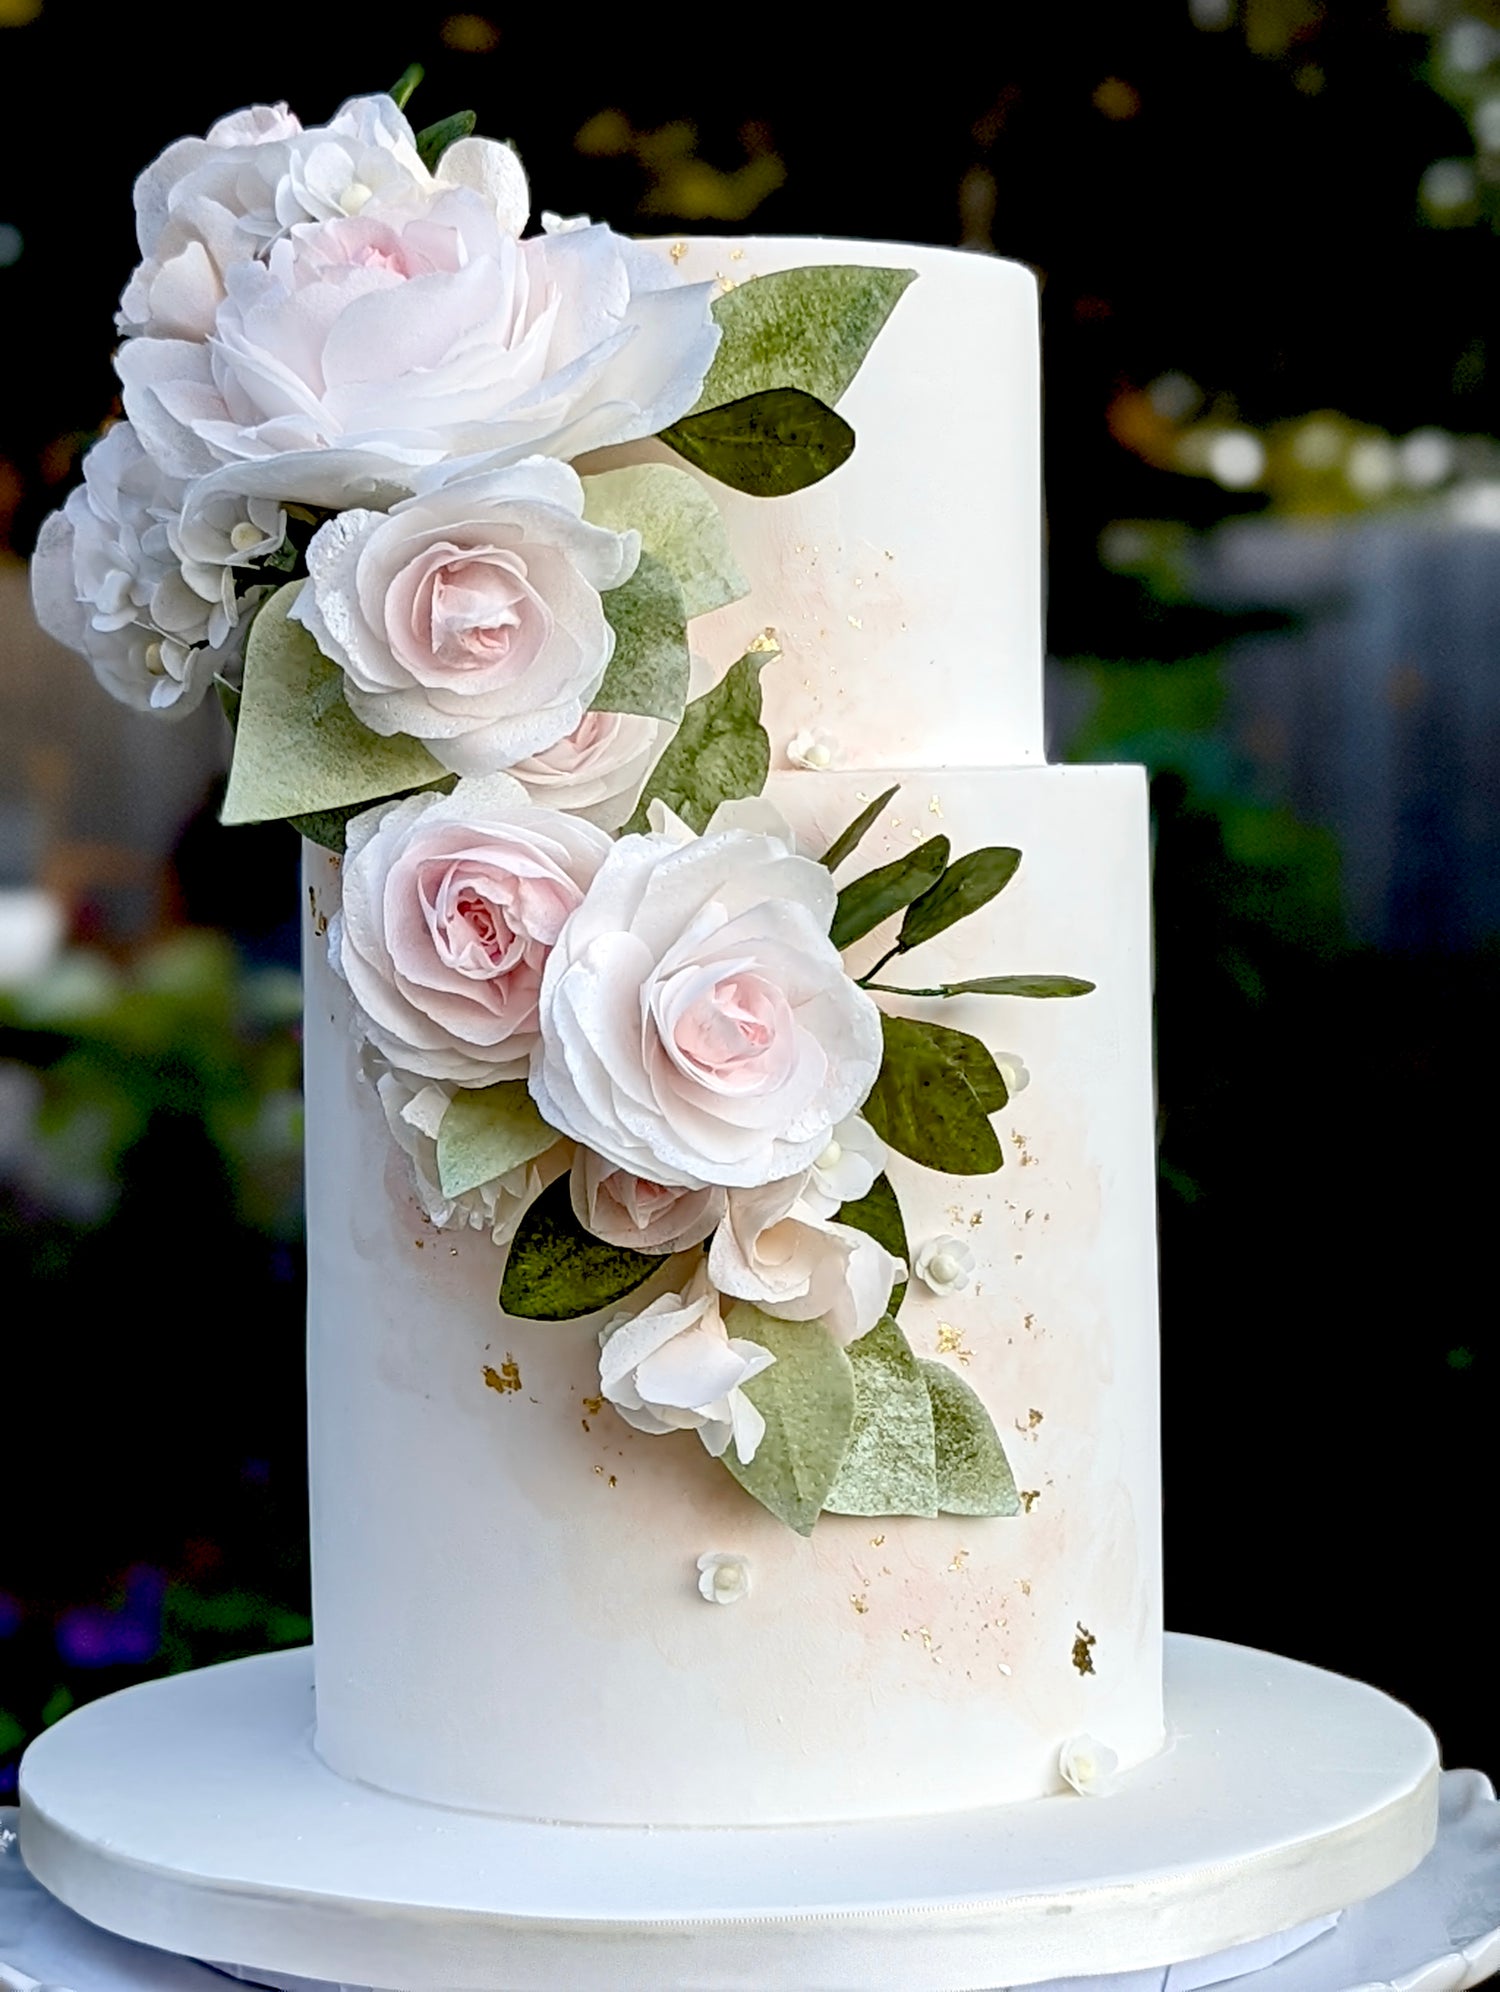 elegant floral wedding cake made by sugar nursery in halifax nova scotia with blush, green, and cream roses and peonies, and painted watercolour finish